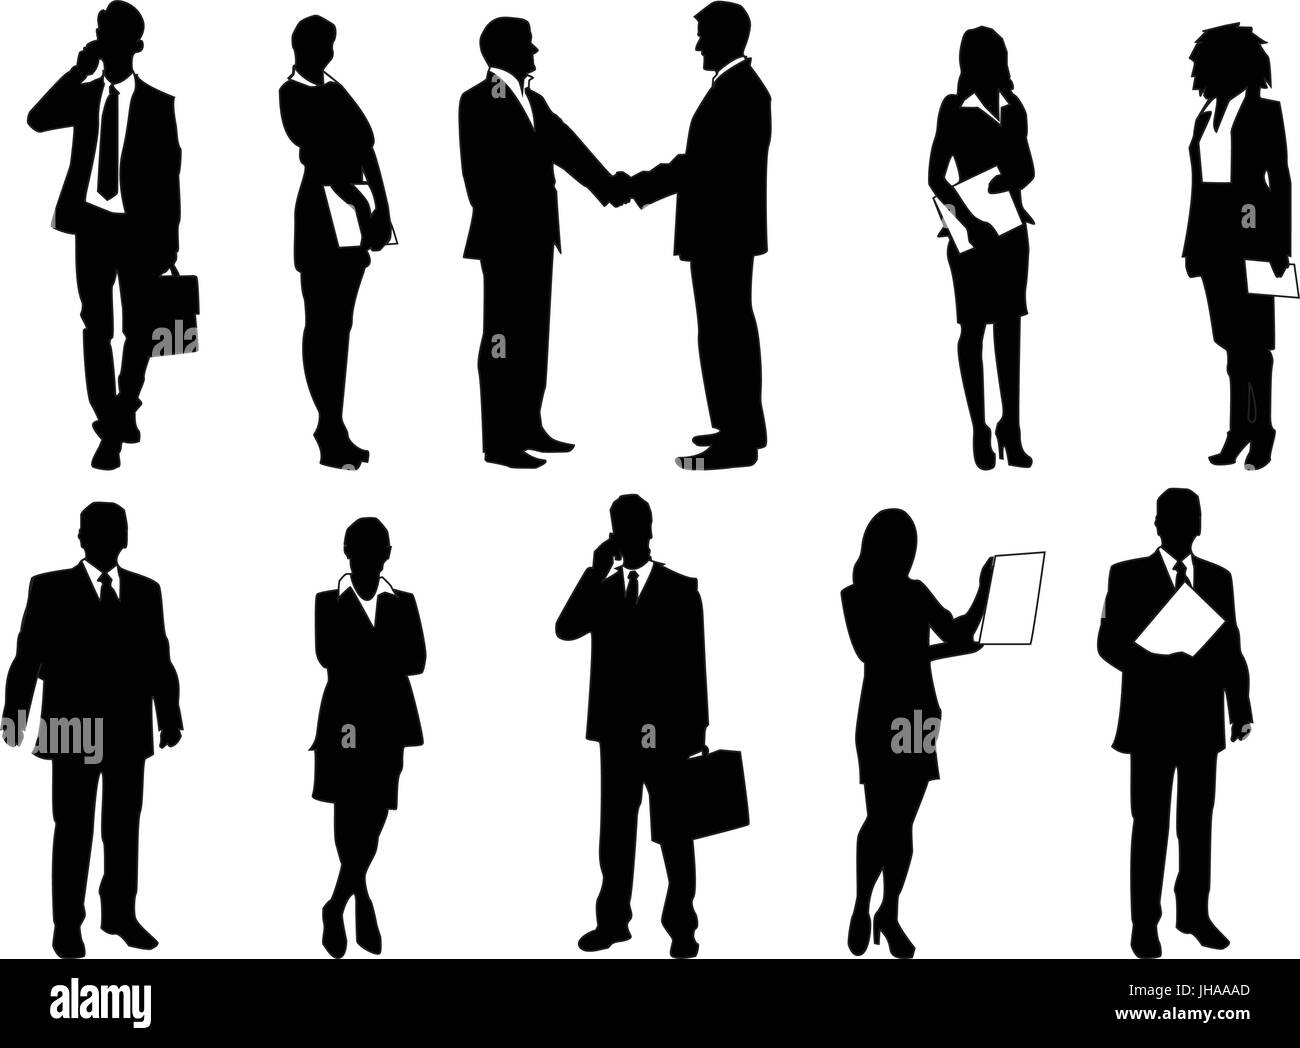 business people silhouettes vector graphic Stock Photo